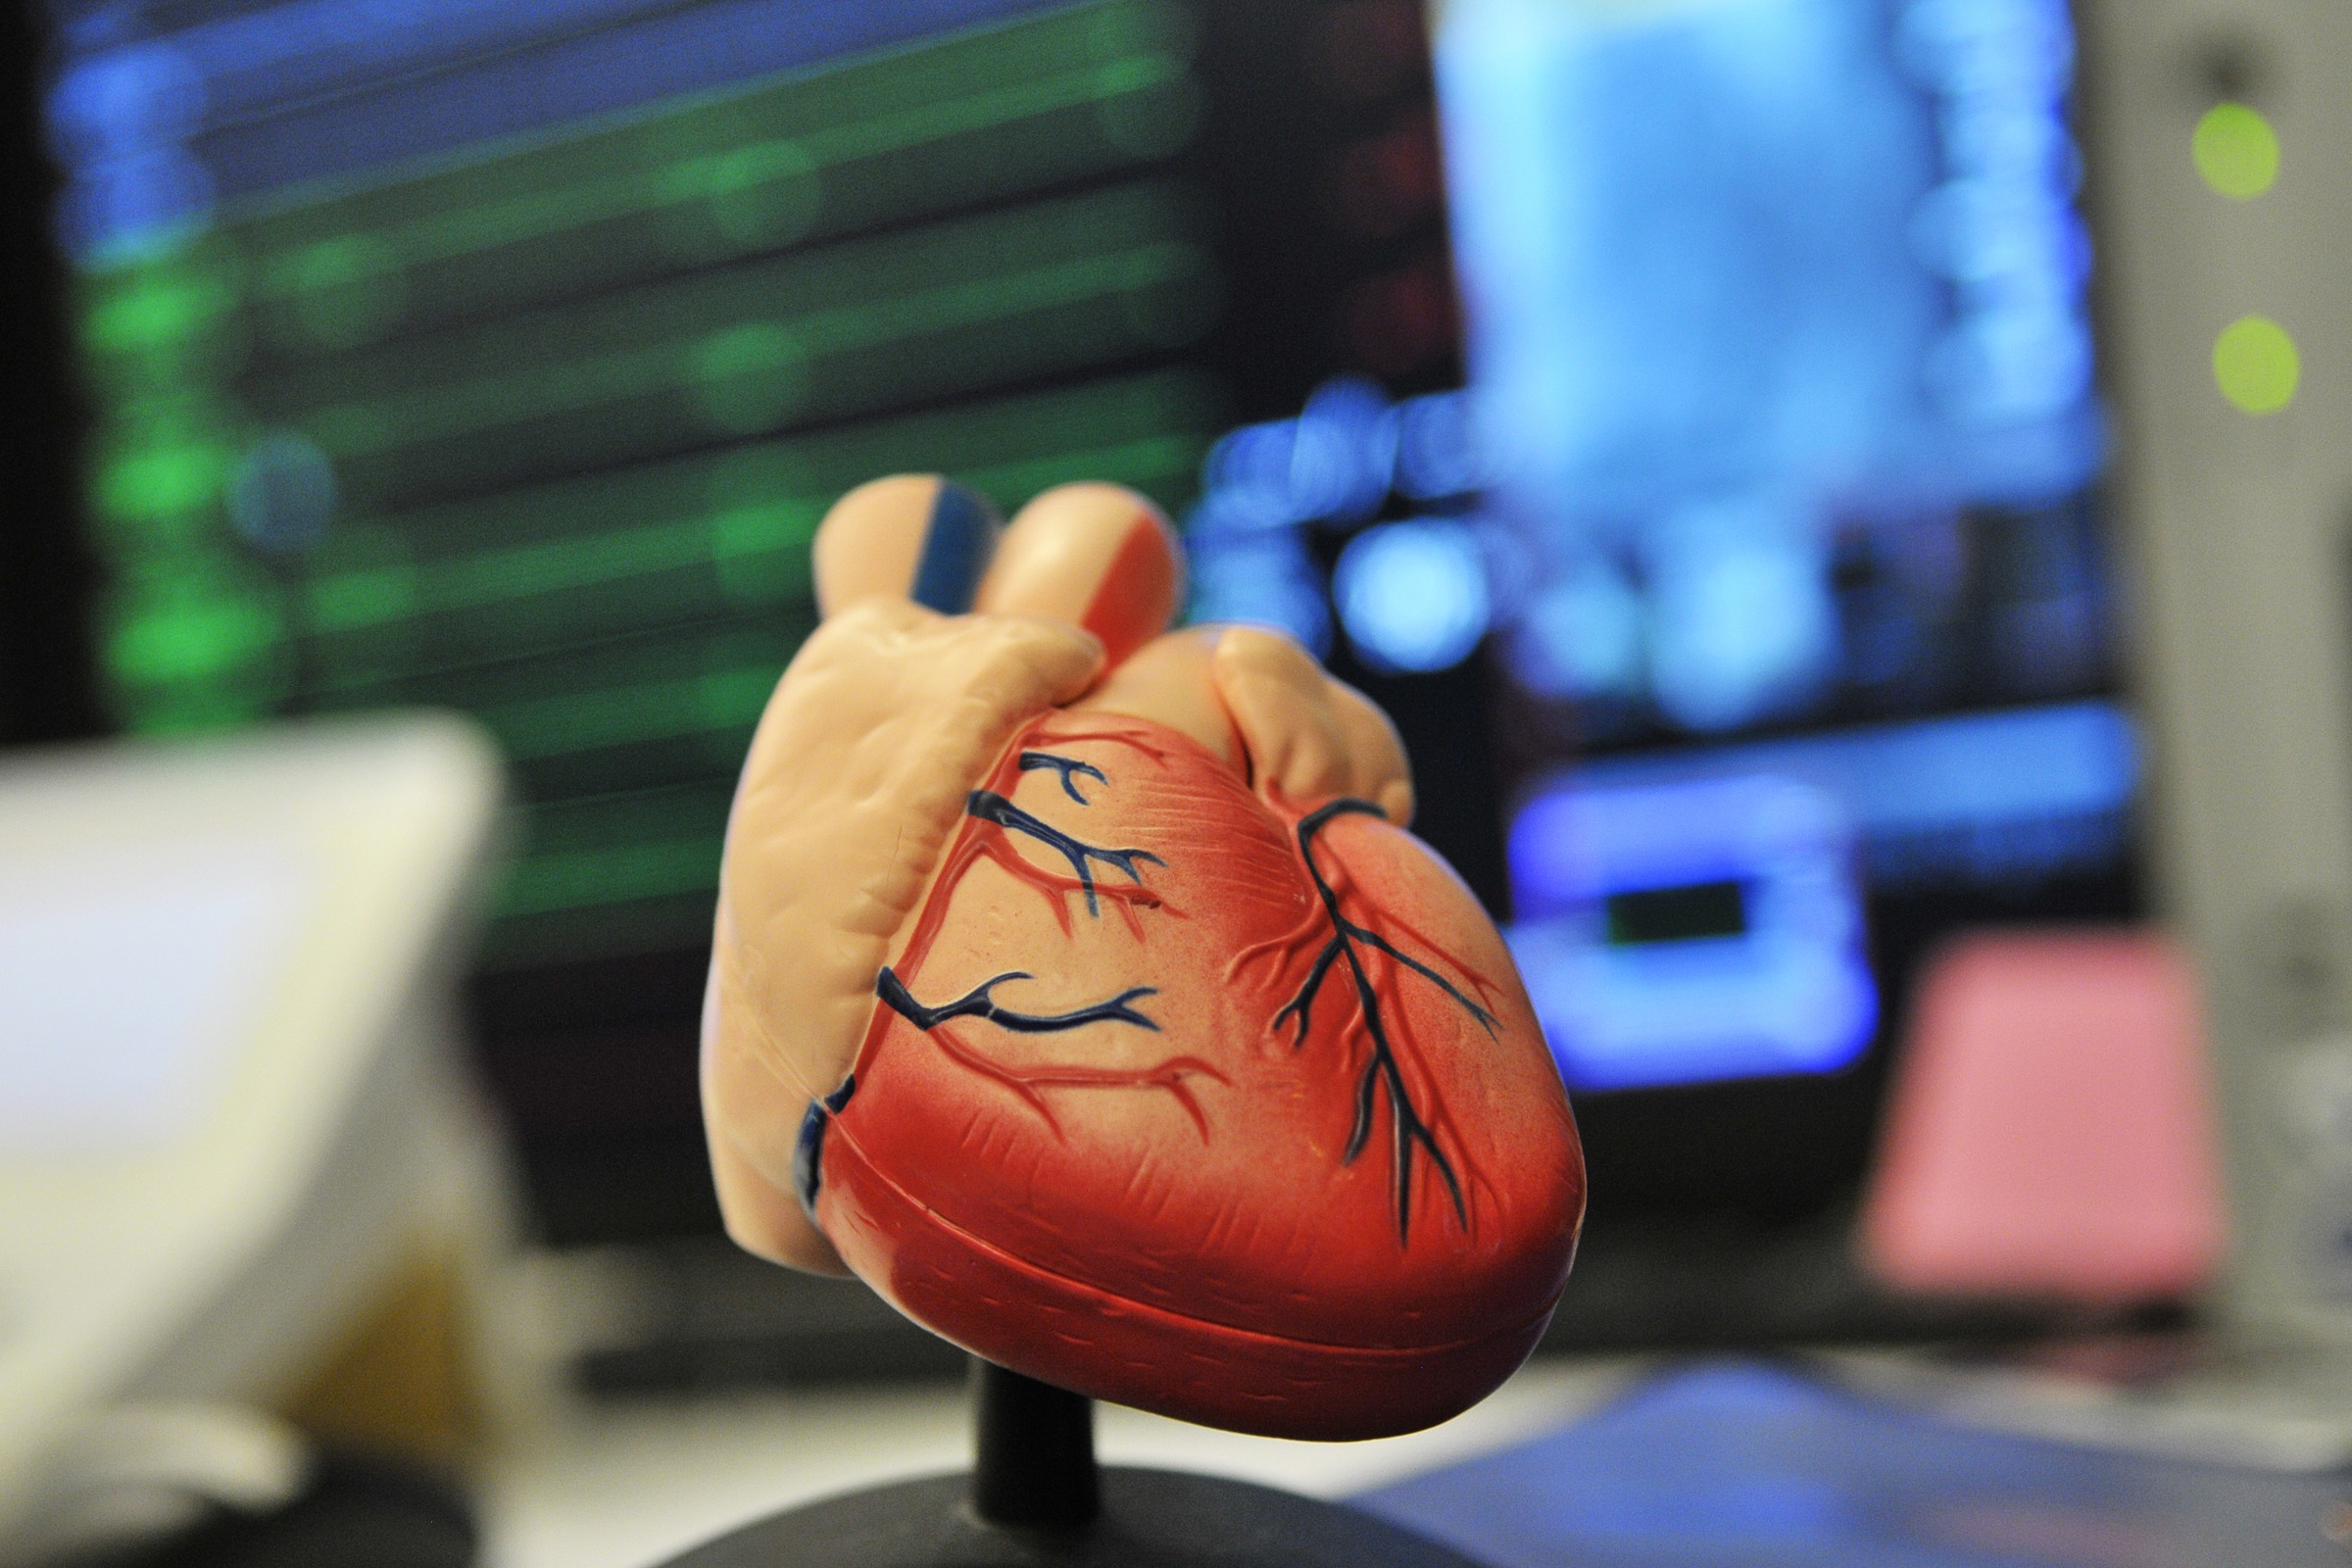 heart model in front of screens